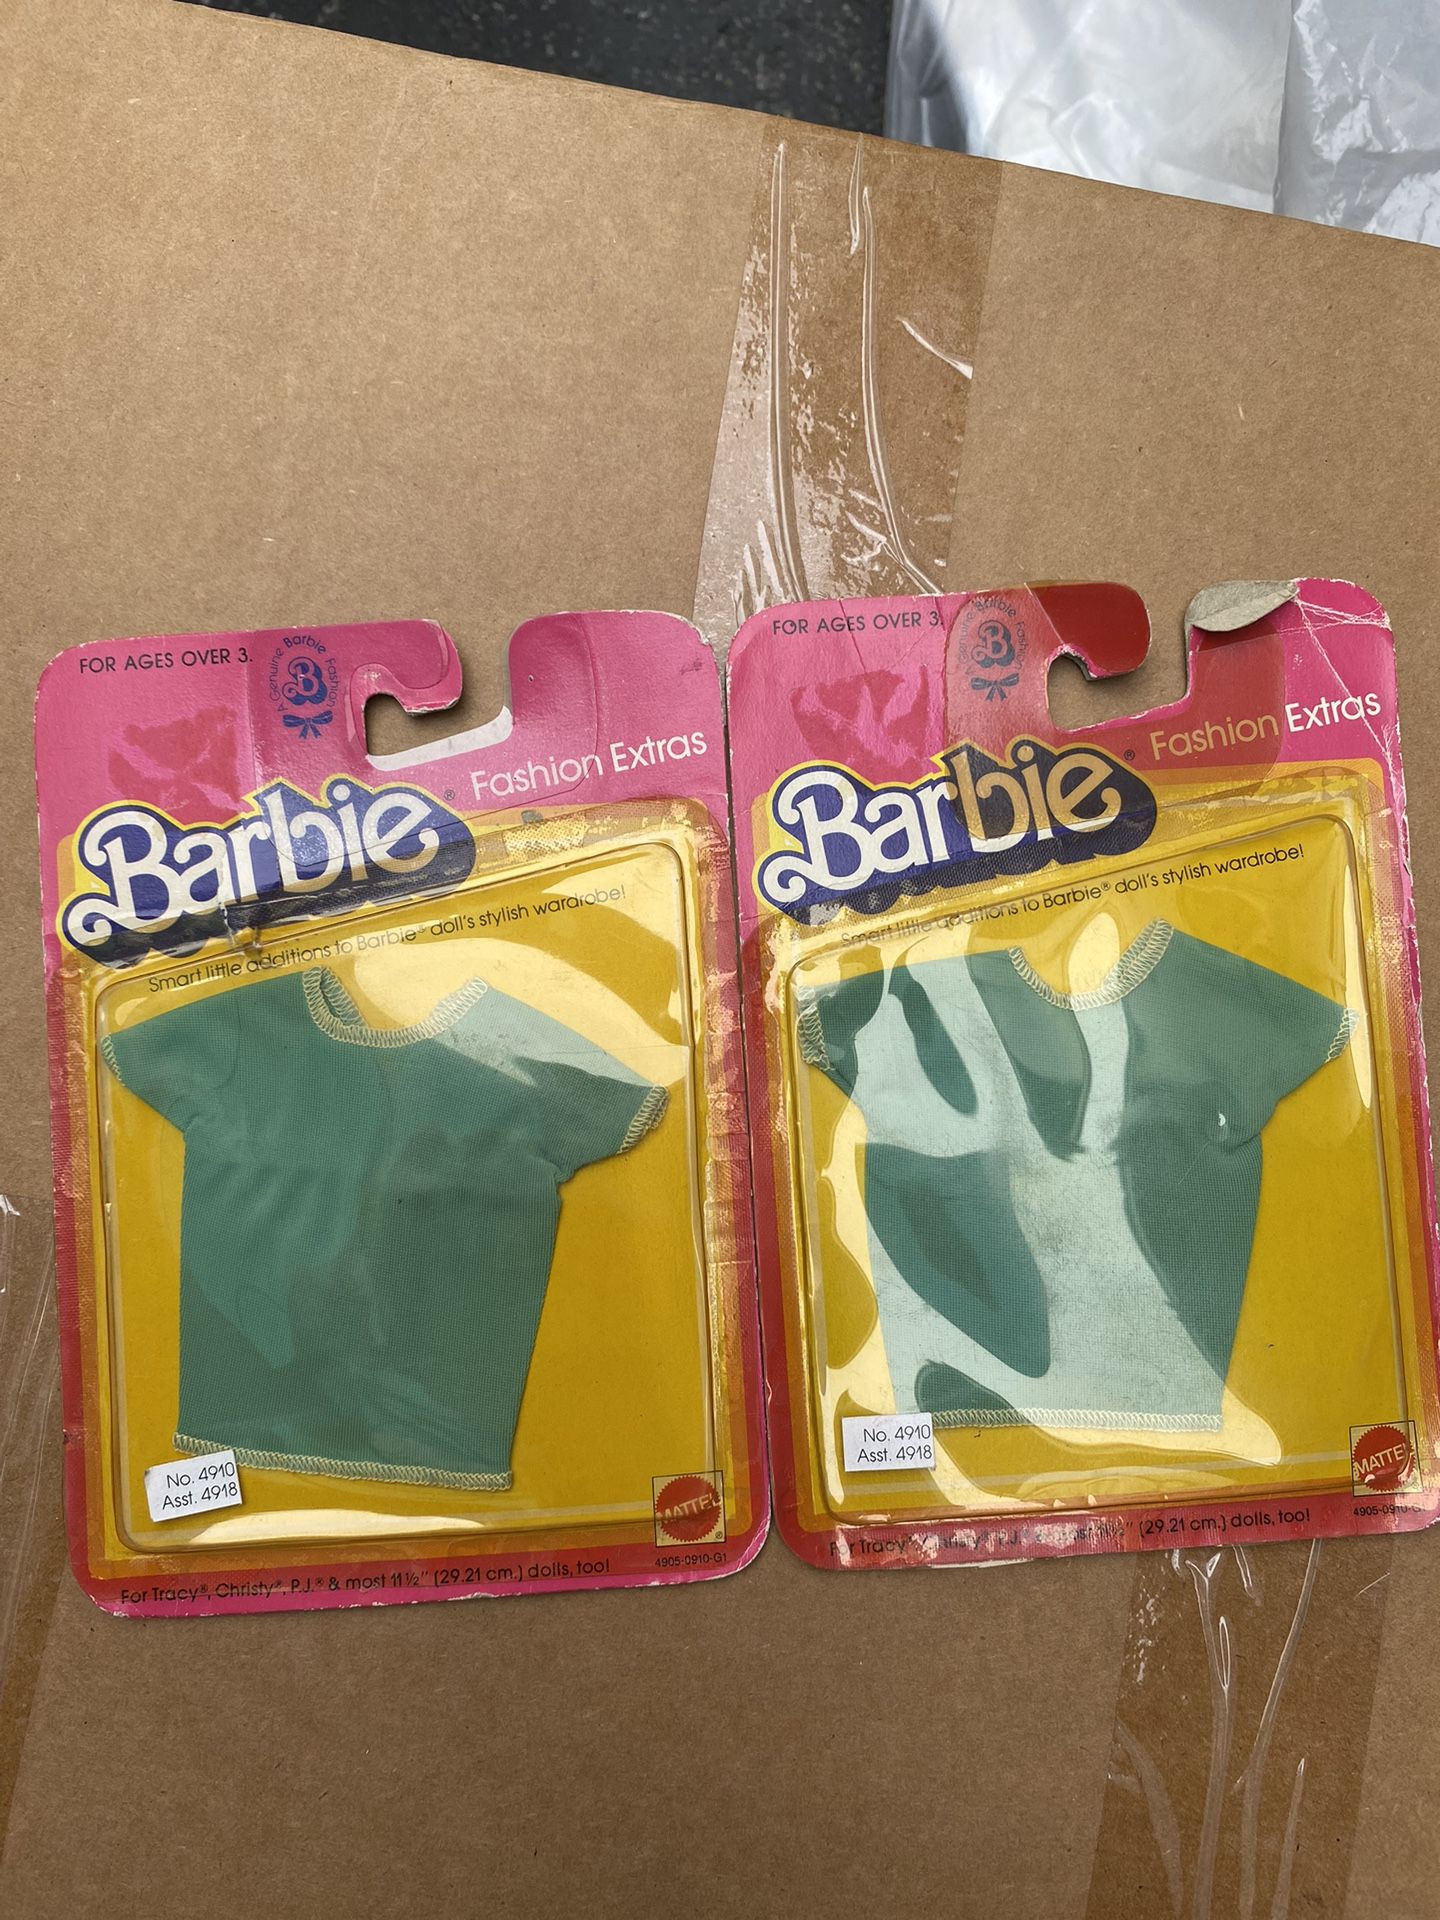 New 1983 Barbie Fashion Extras Doll clothes $10 each